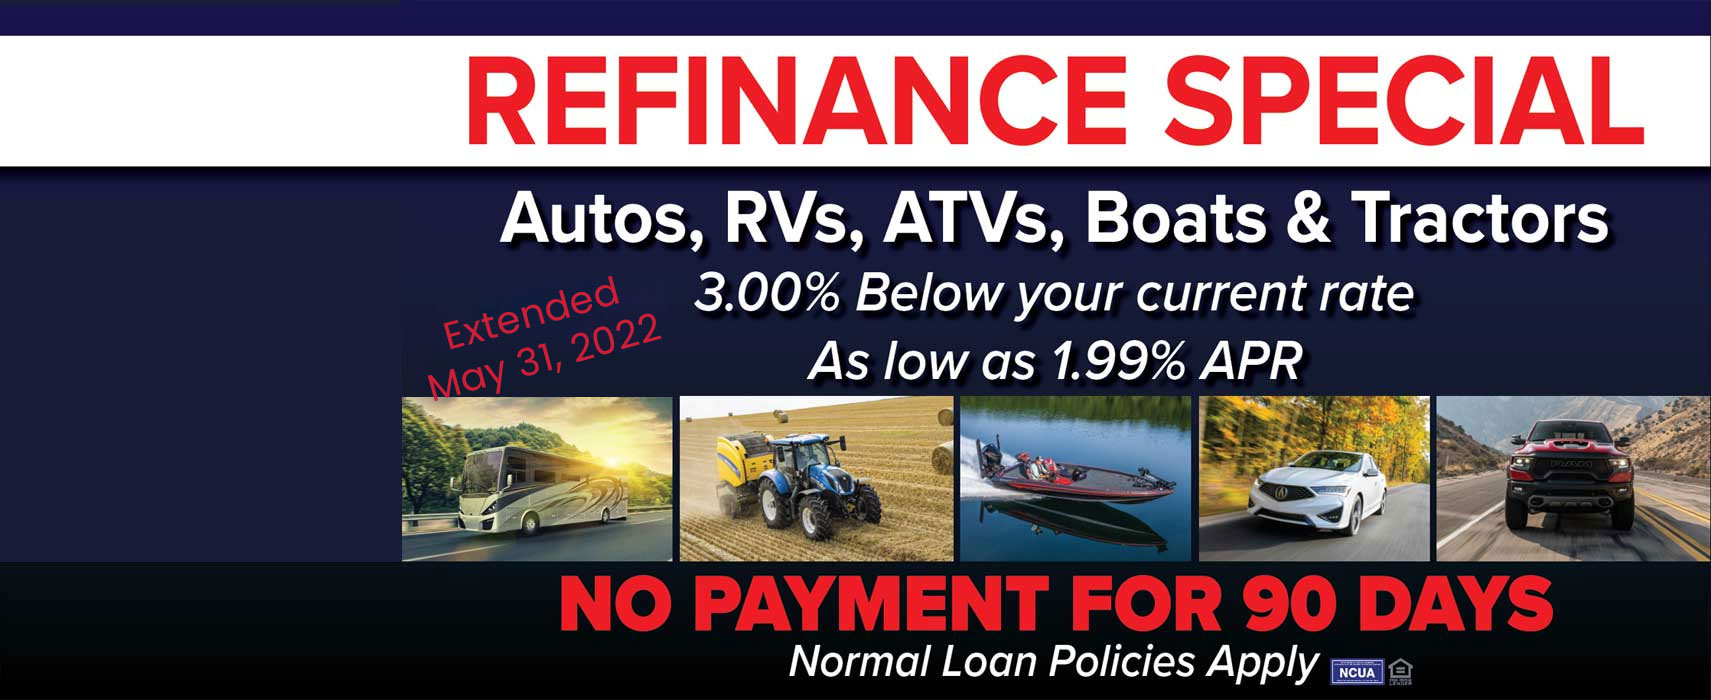 Re-finance Special Ad